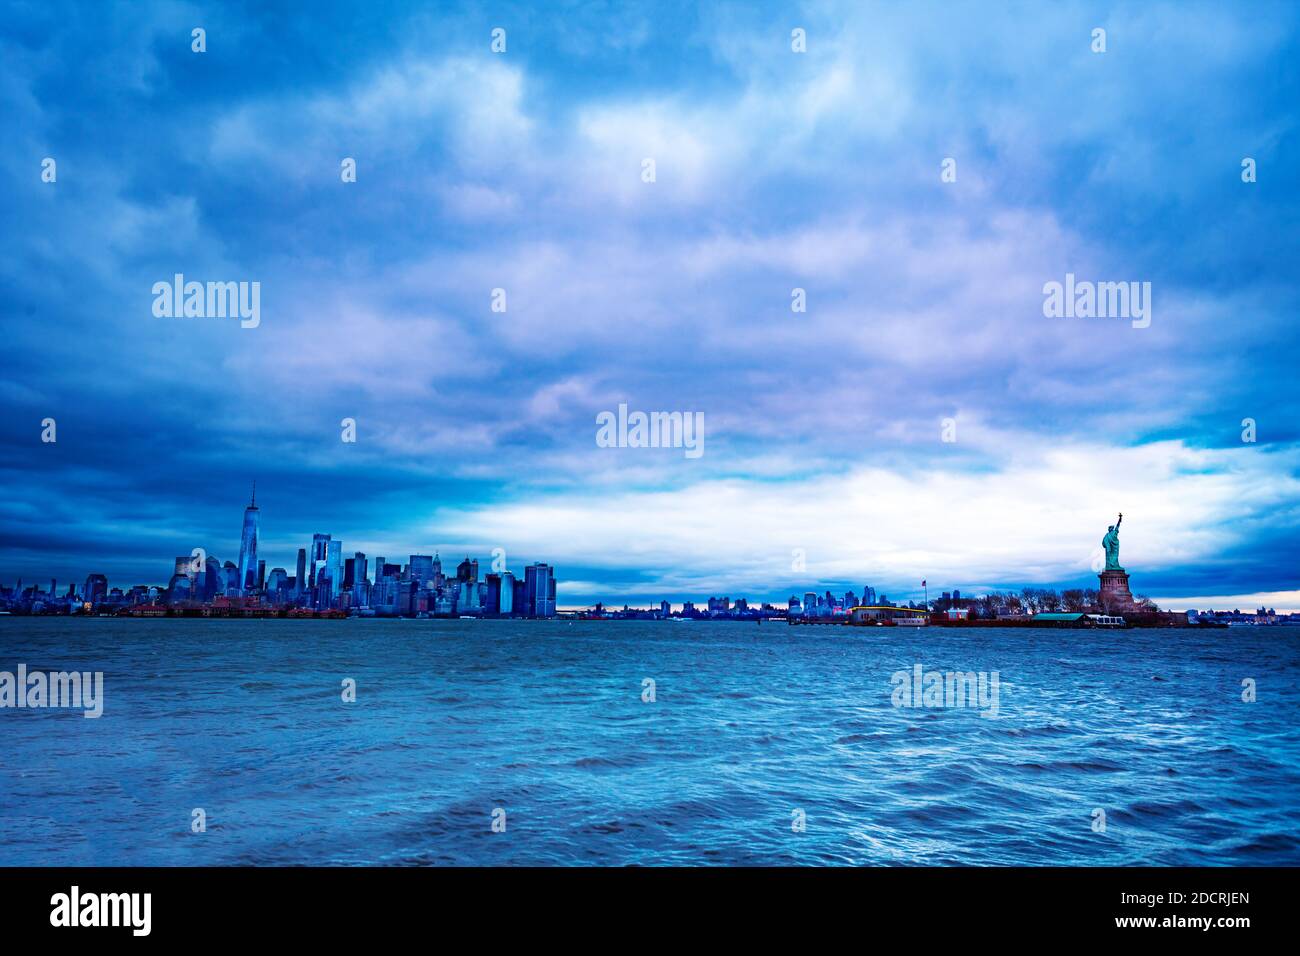 The Statue of Liberty over the New York cityscape at the evening dusk and cloudy weather Stock Photo